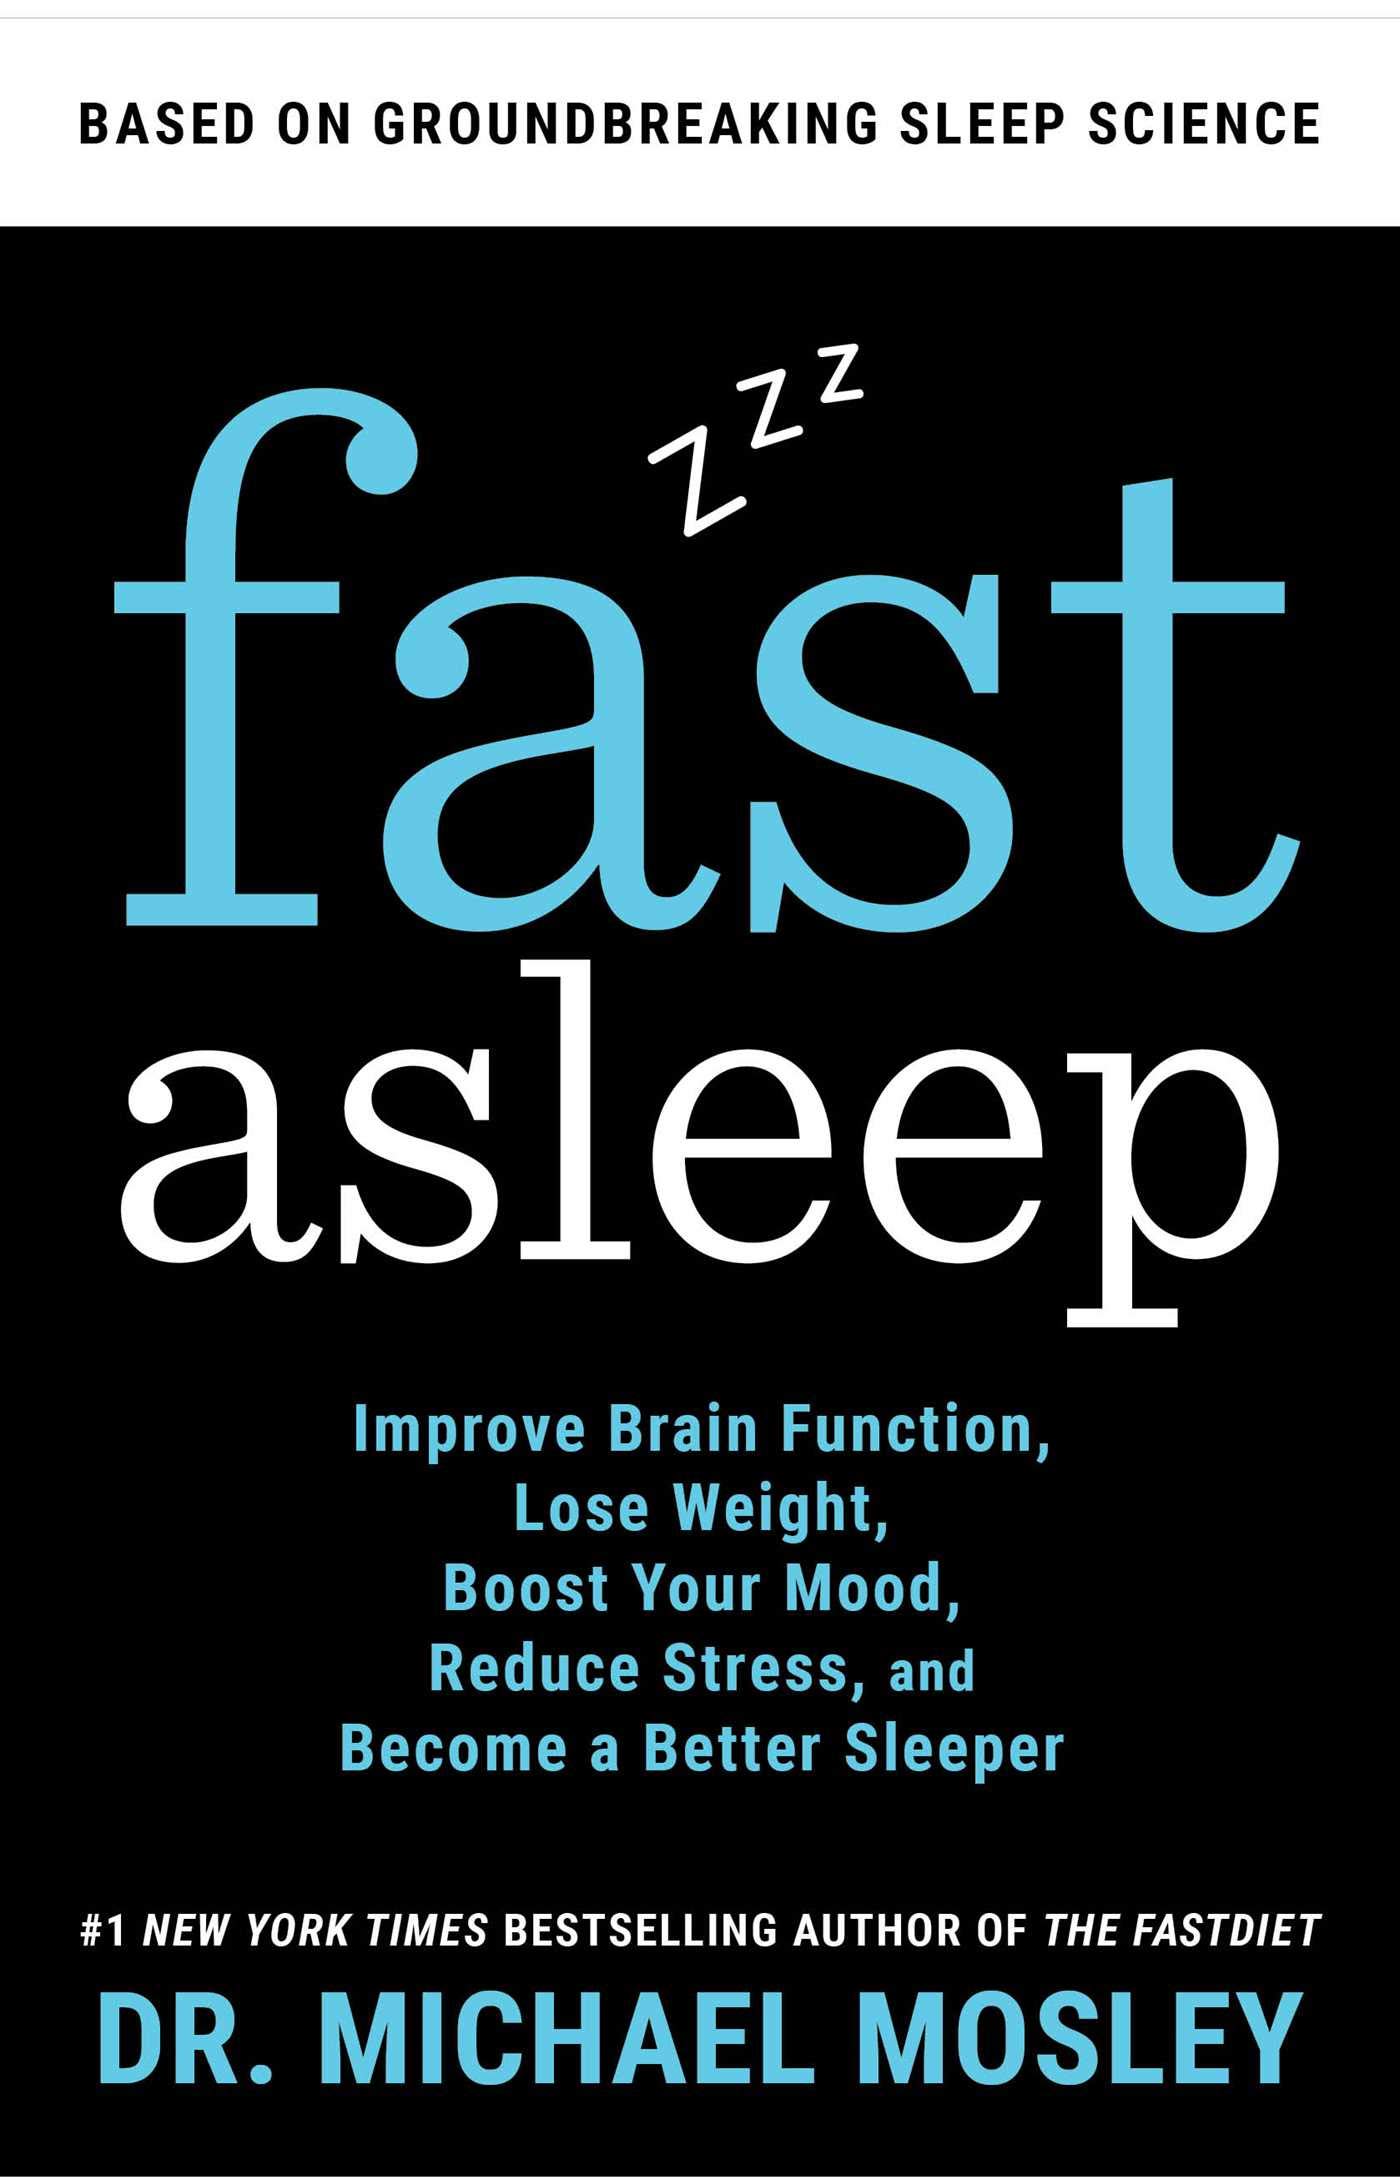 Image for "Fast Asleep"